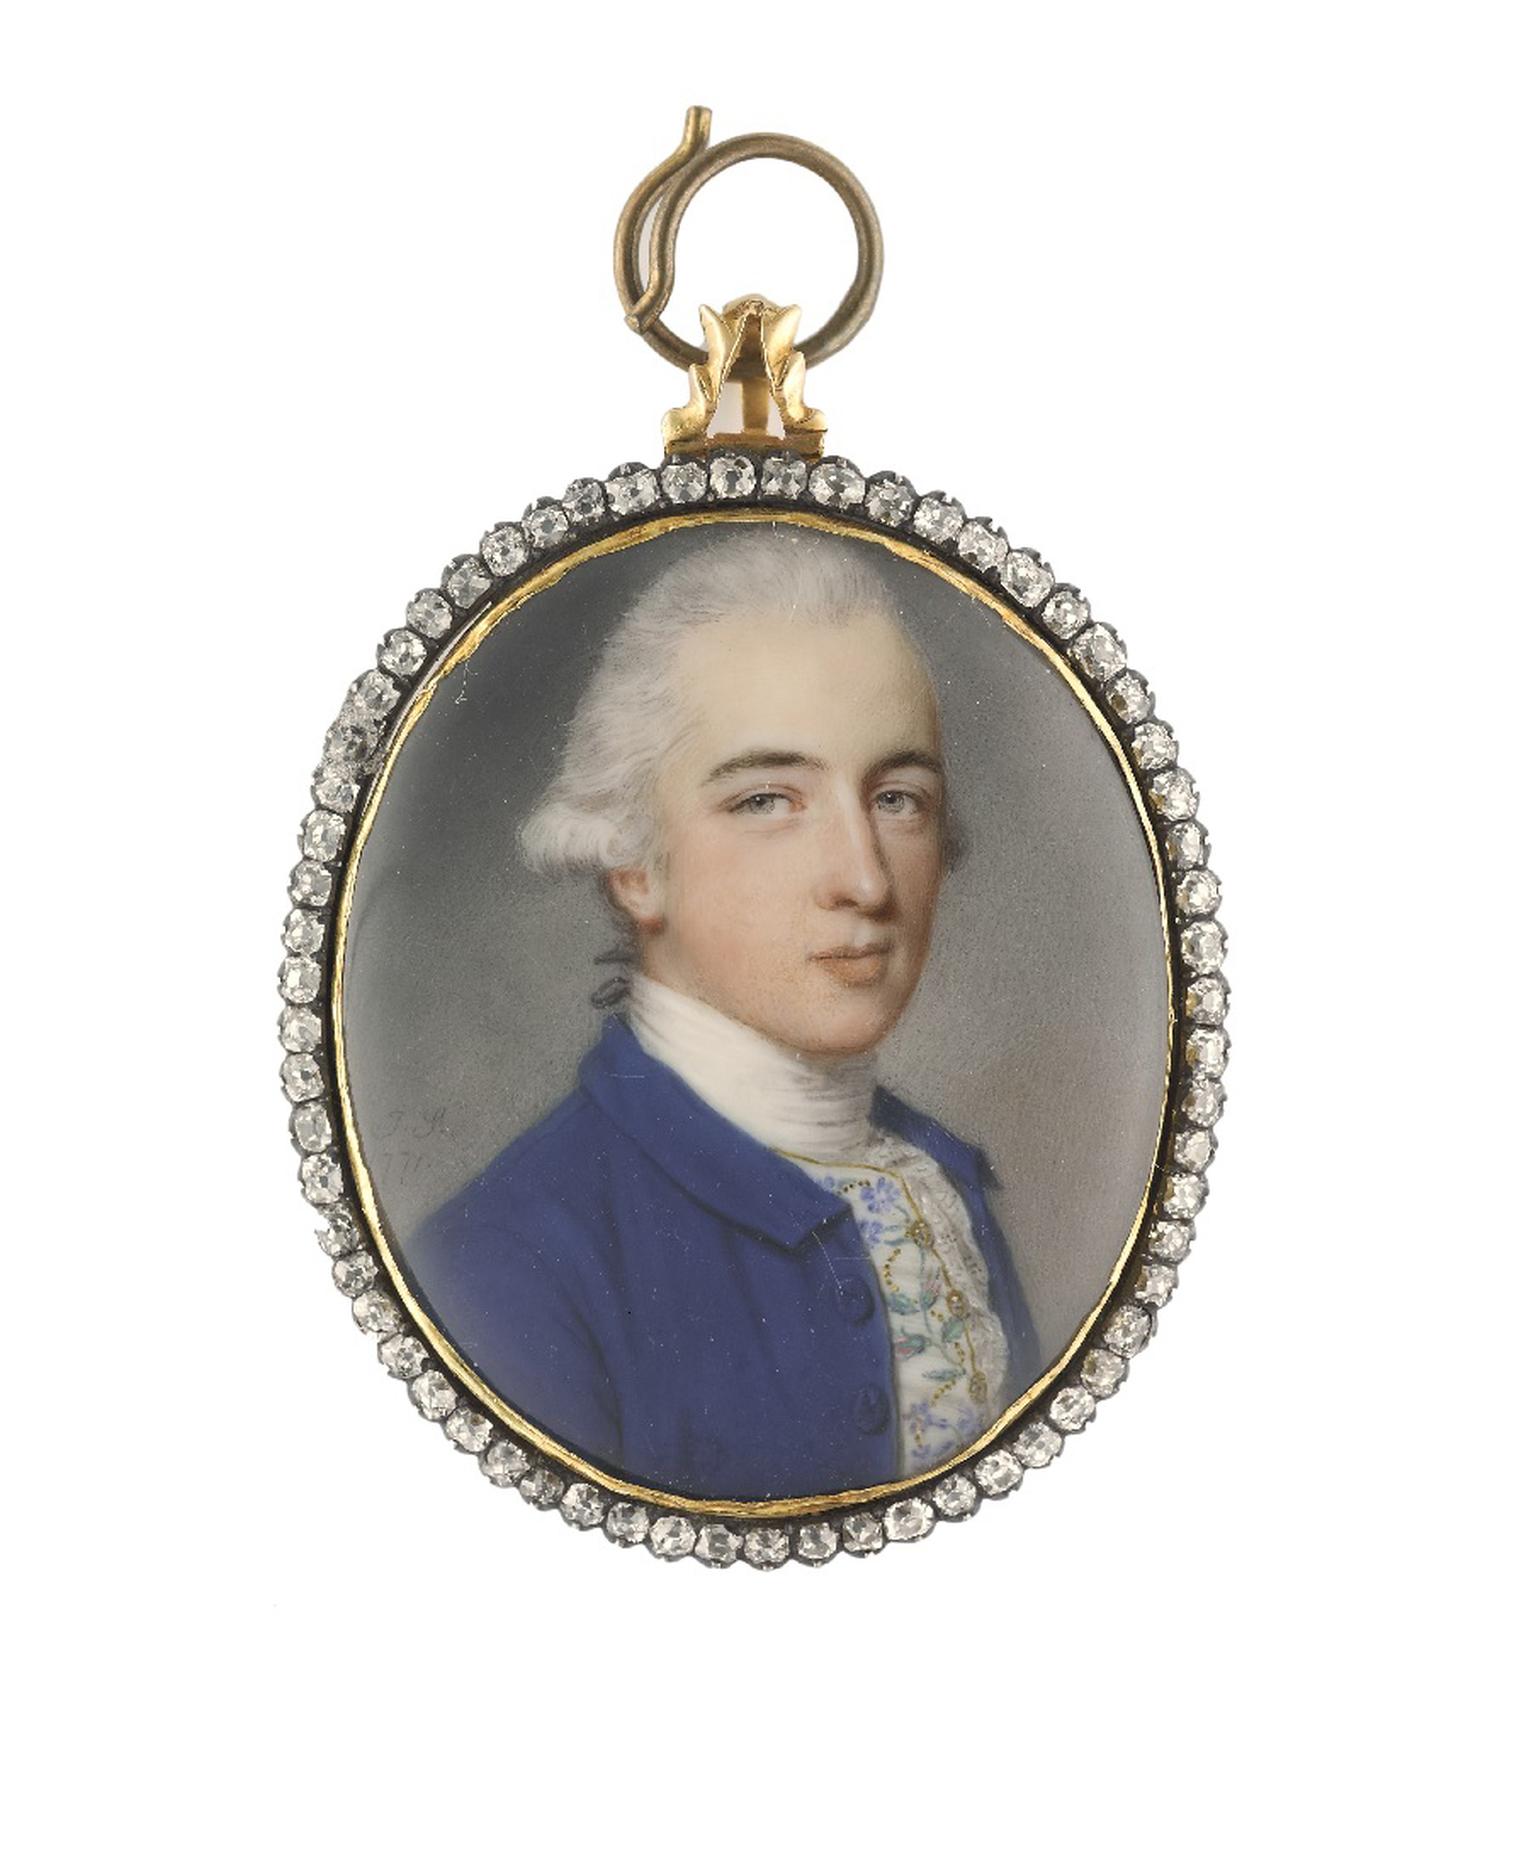 John Smart portrait miniature of Richard Twining, scion of the famous tea dynasty, surrounded by diamonds. Image by: Philip Mould & Company.